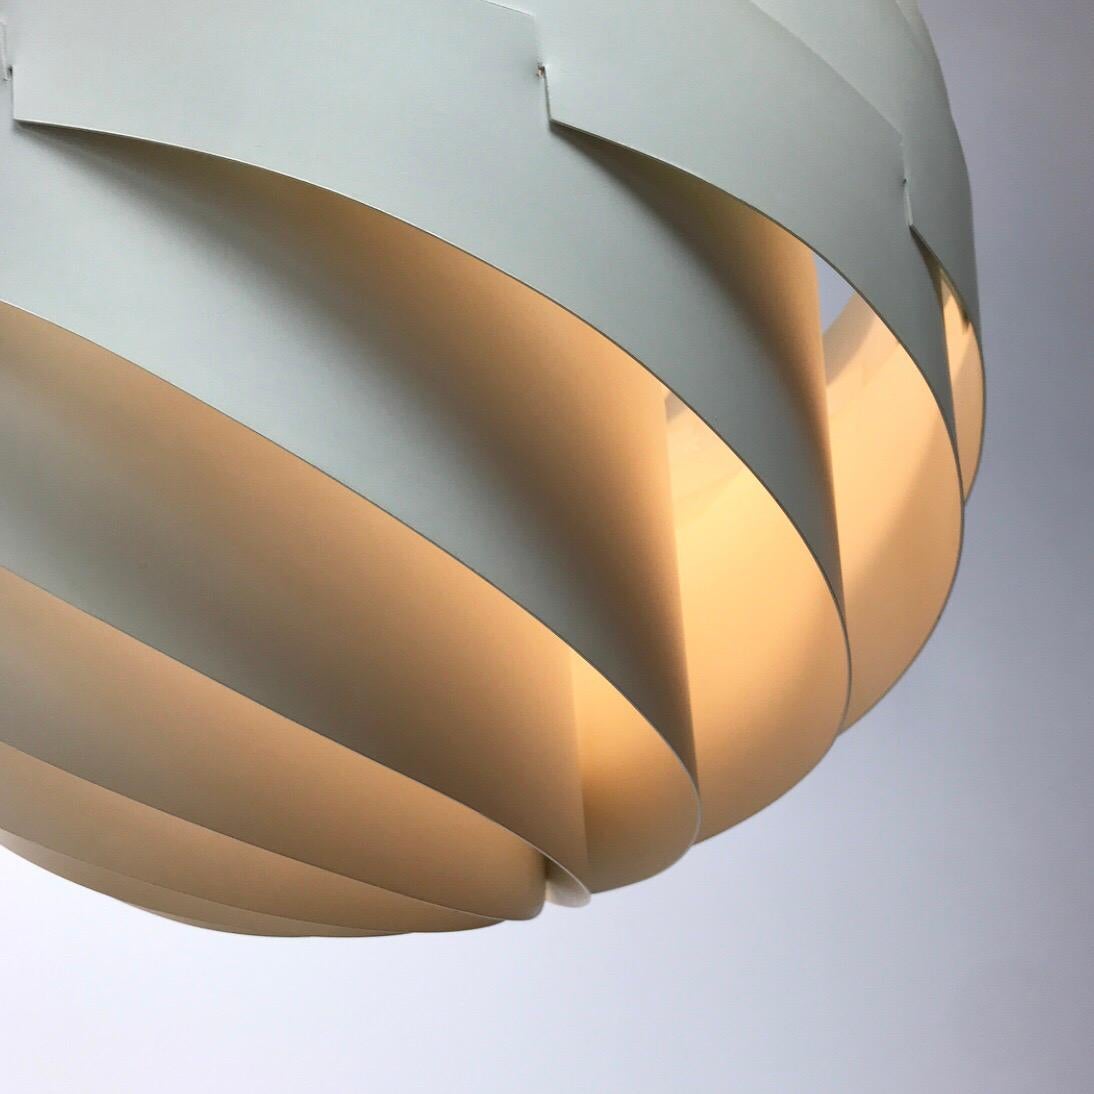 Iconic danish midcentury ceiling light Turbo designed in 1965 by Louis Weisdorf,
Denmark.

A real collectors choice. Newly relaunched but this piece is the real deal which makes it a very high sought design light. 

Weisdorf used Japanese